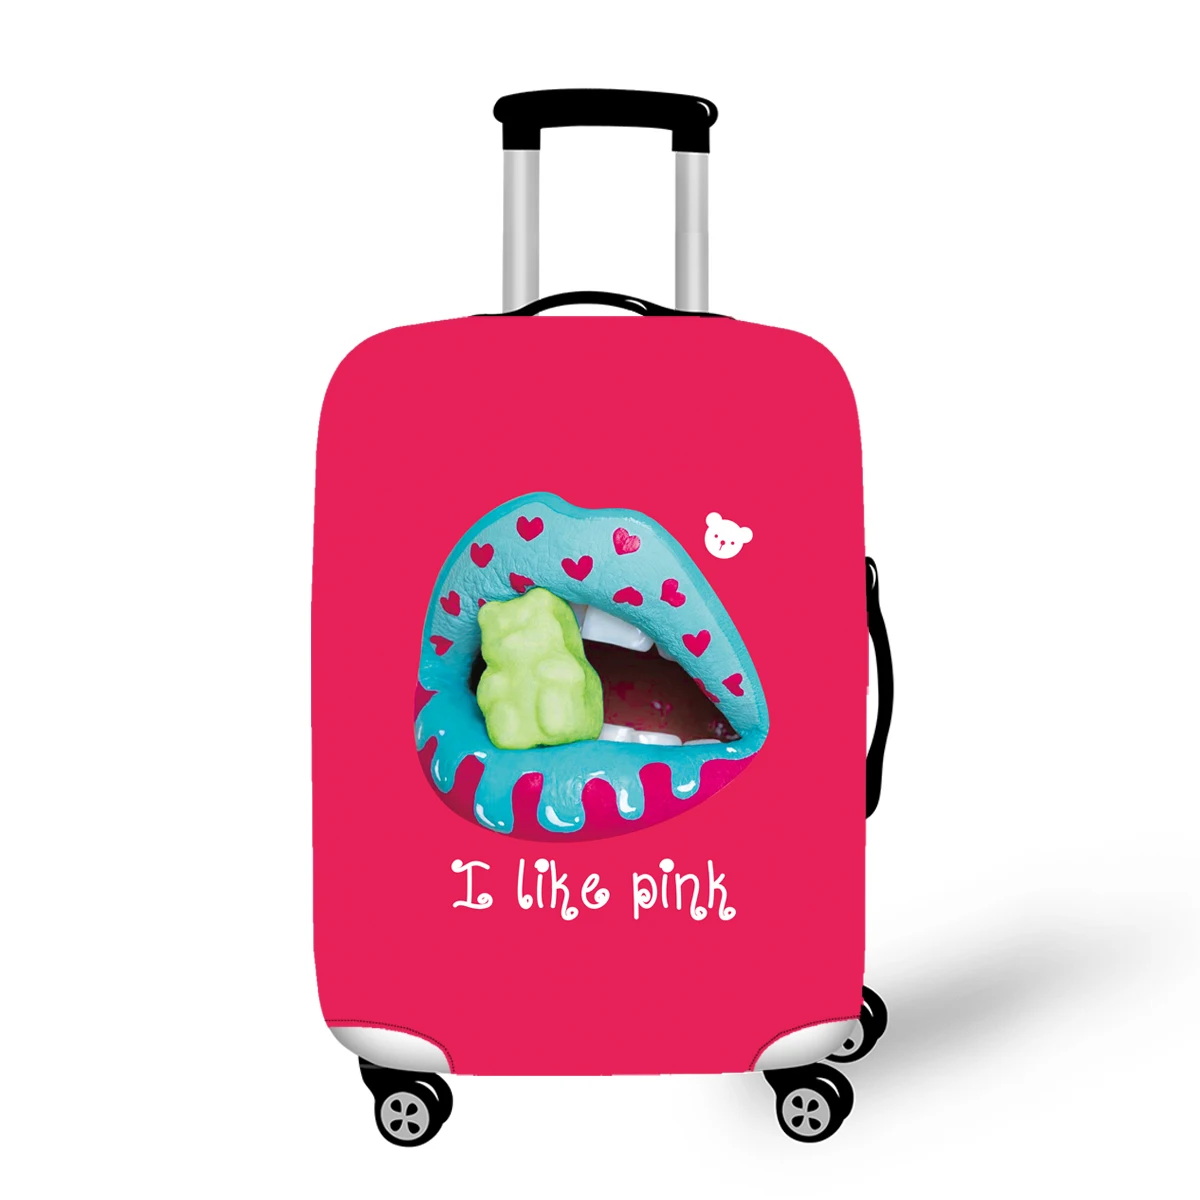 

Elastic luggage cover for kids or adult size S/M/L for choose anti dust protect suitcase luggage case cover design custom, Full printing color